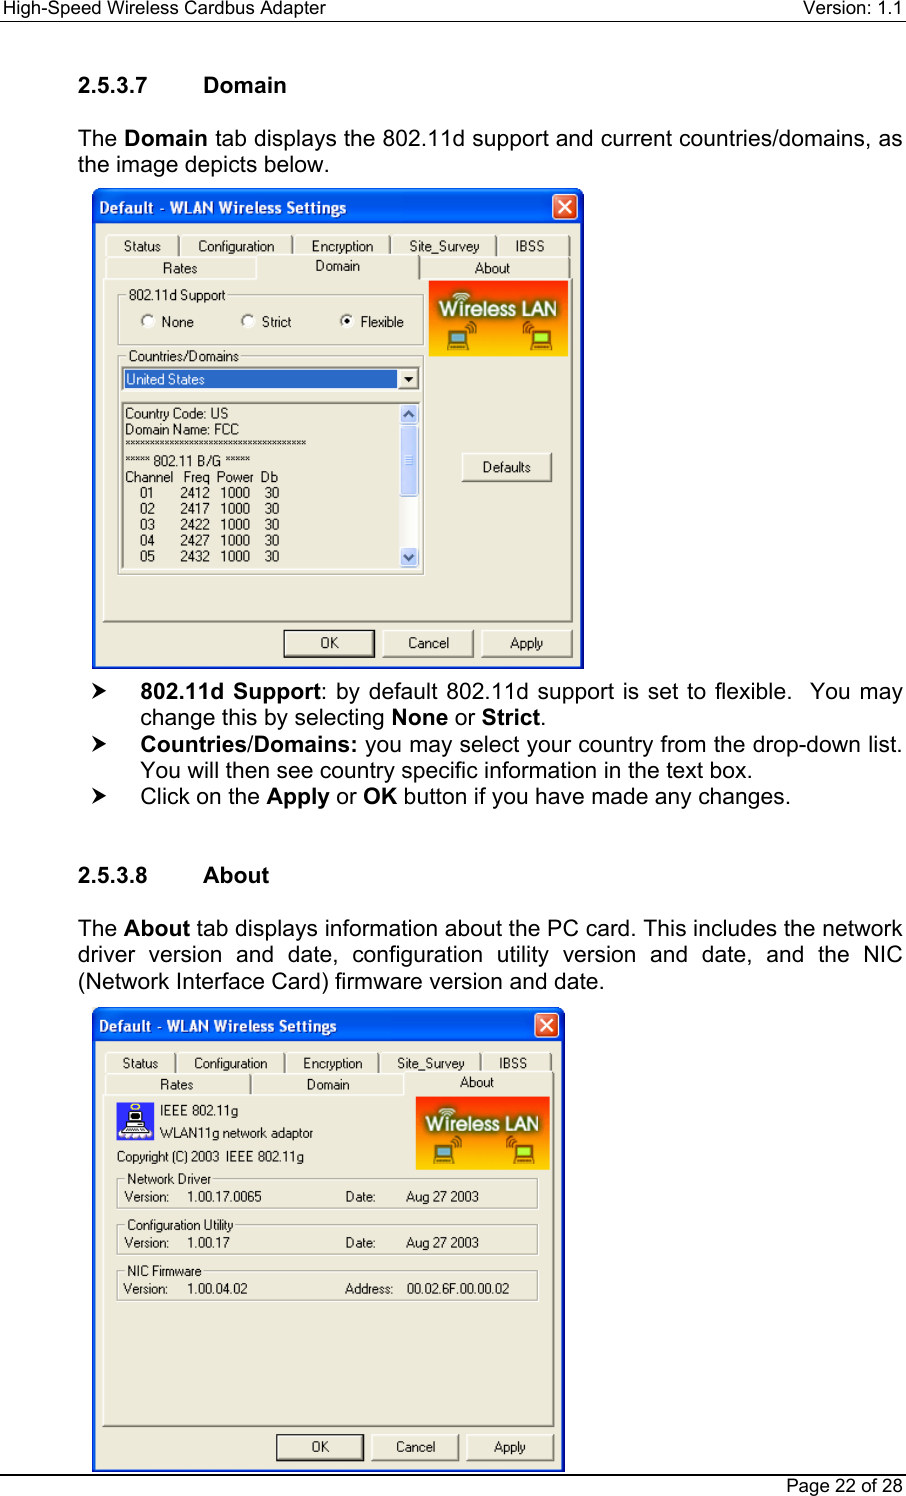 High-Speed Wireless Cardbus Adapter Version: 1.1Page 22 of 282.5.3.7    DomainThe Domain tab displays the 802.11d support and current countries/domains, asthe image depicts below.h 802.11d Support: by default 802.11d support is set to flexible.  You maychange this by selecting None or Strict.h Countries/Domains: you may select your country from the drop-down list.You will then see country specific information in the text box.h  Click on the Apply or OK button if you have made any changes.2.5.3.8    AboutThe About tab displays information about the PC card. This includes the networkdriver version and date, configuration utility version and date, and the NIC(Network Interface Card) firmware version and date.